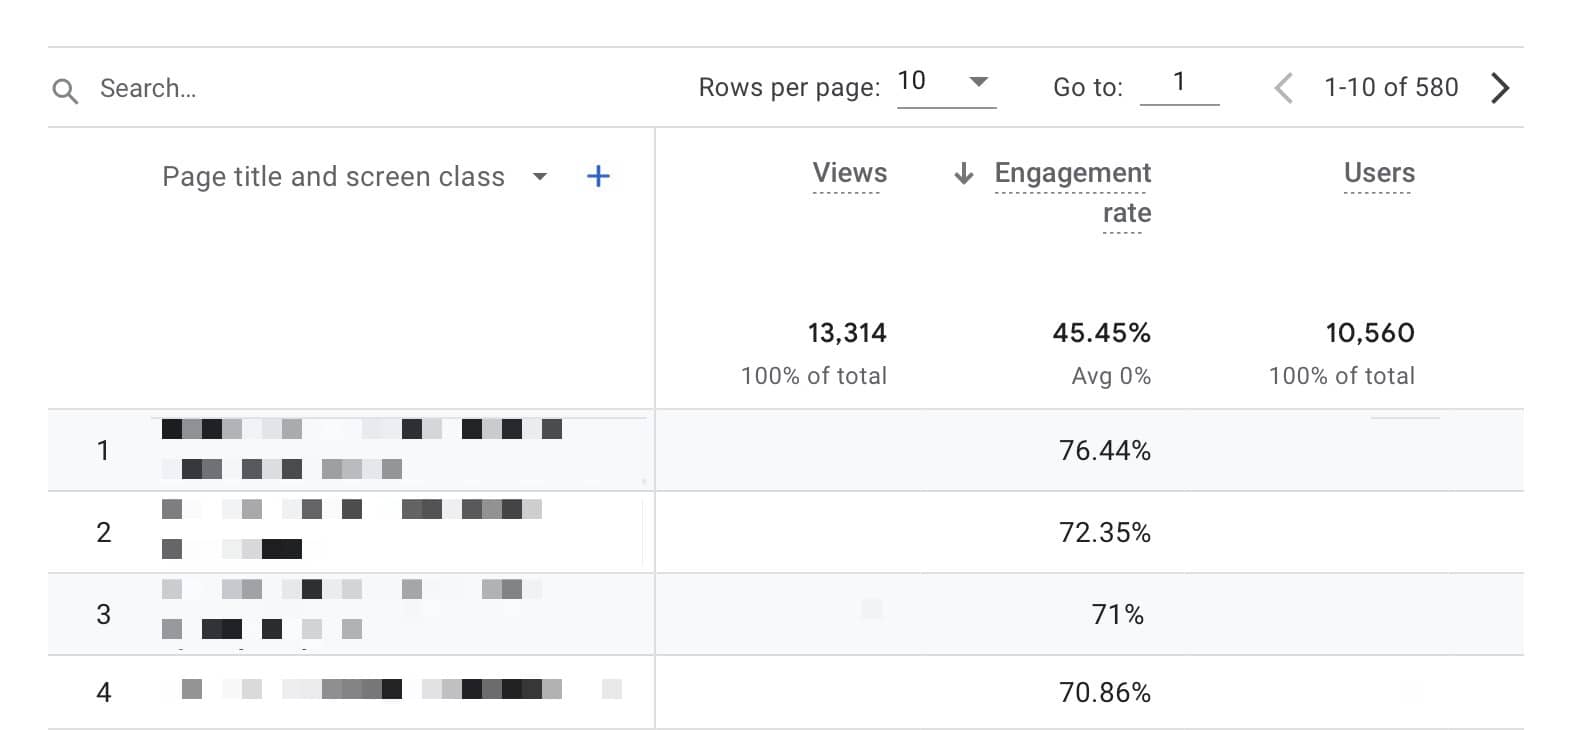 check engagement rate per page